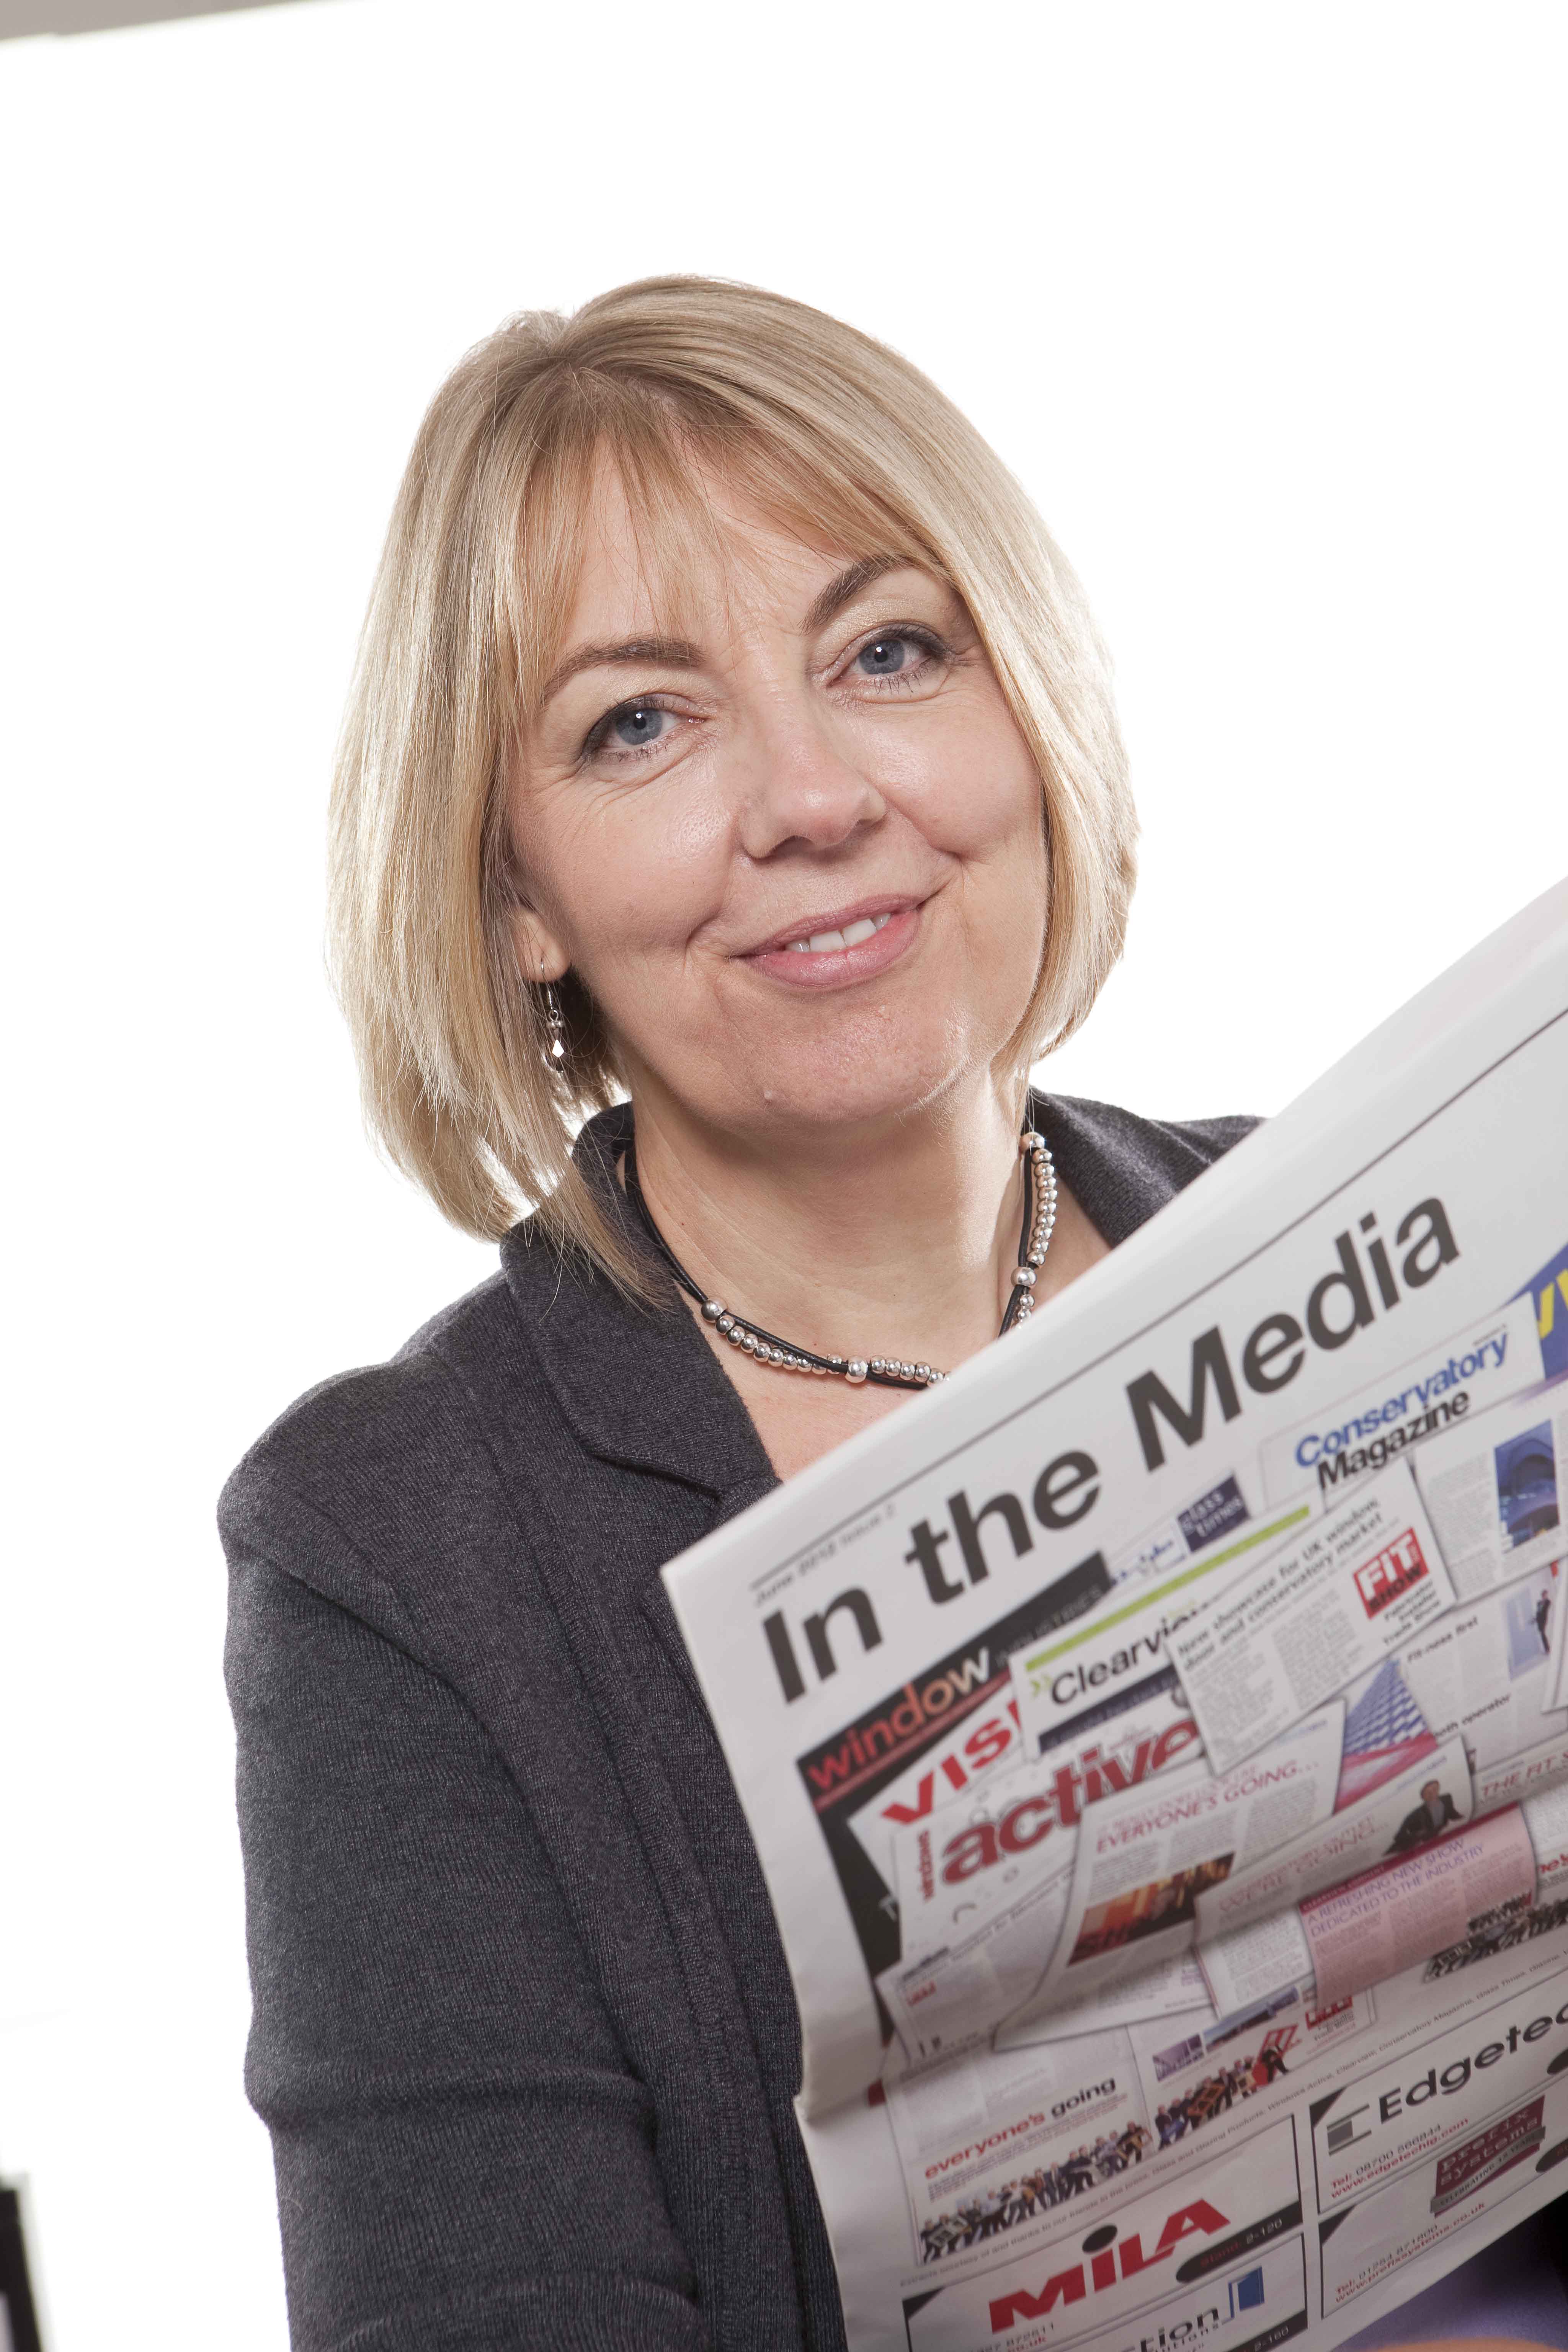 Amanda holding a newspaper called 'in the media'